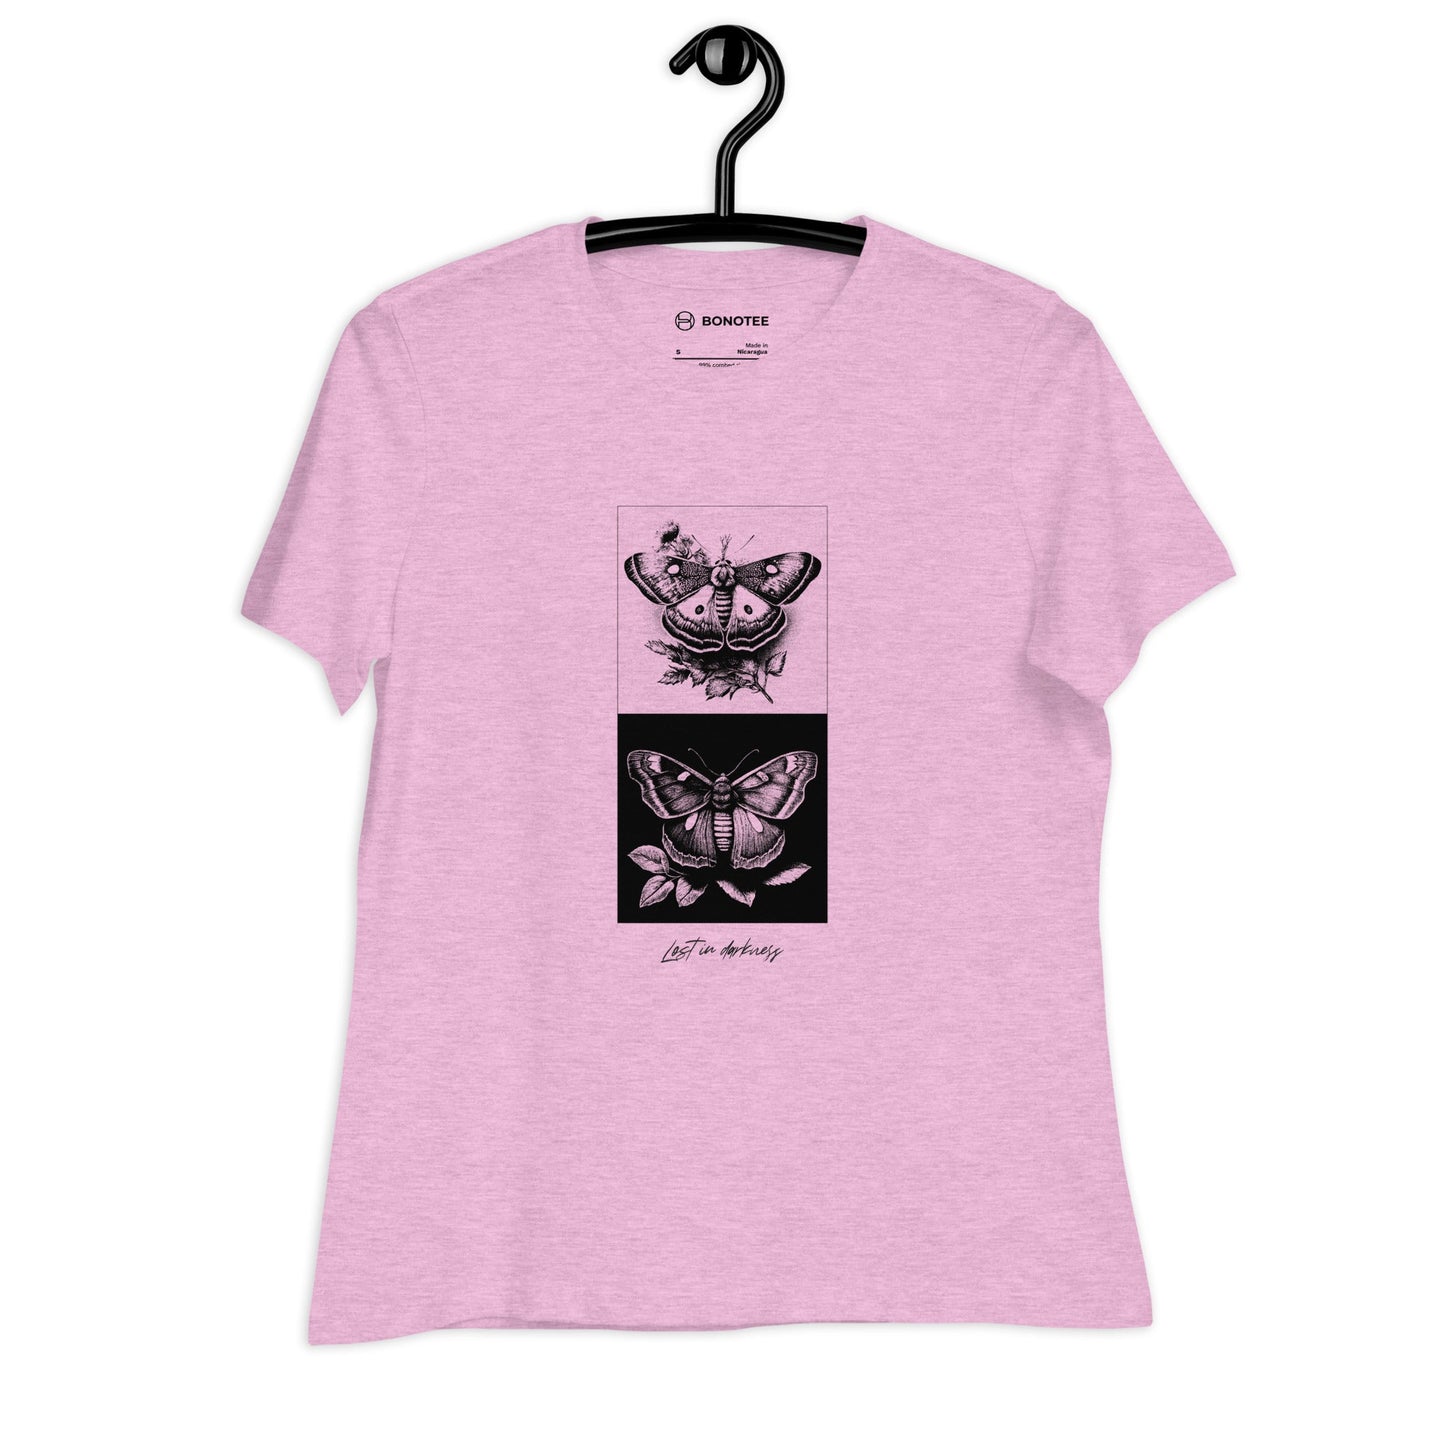 LOST IN DARKNESS Women's T-Shirt - Bonotee